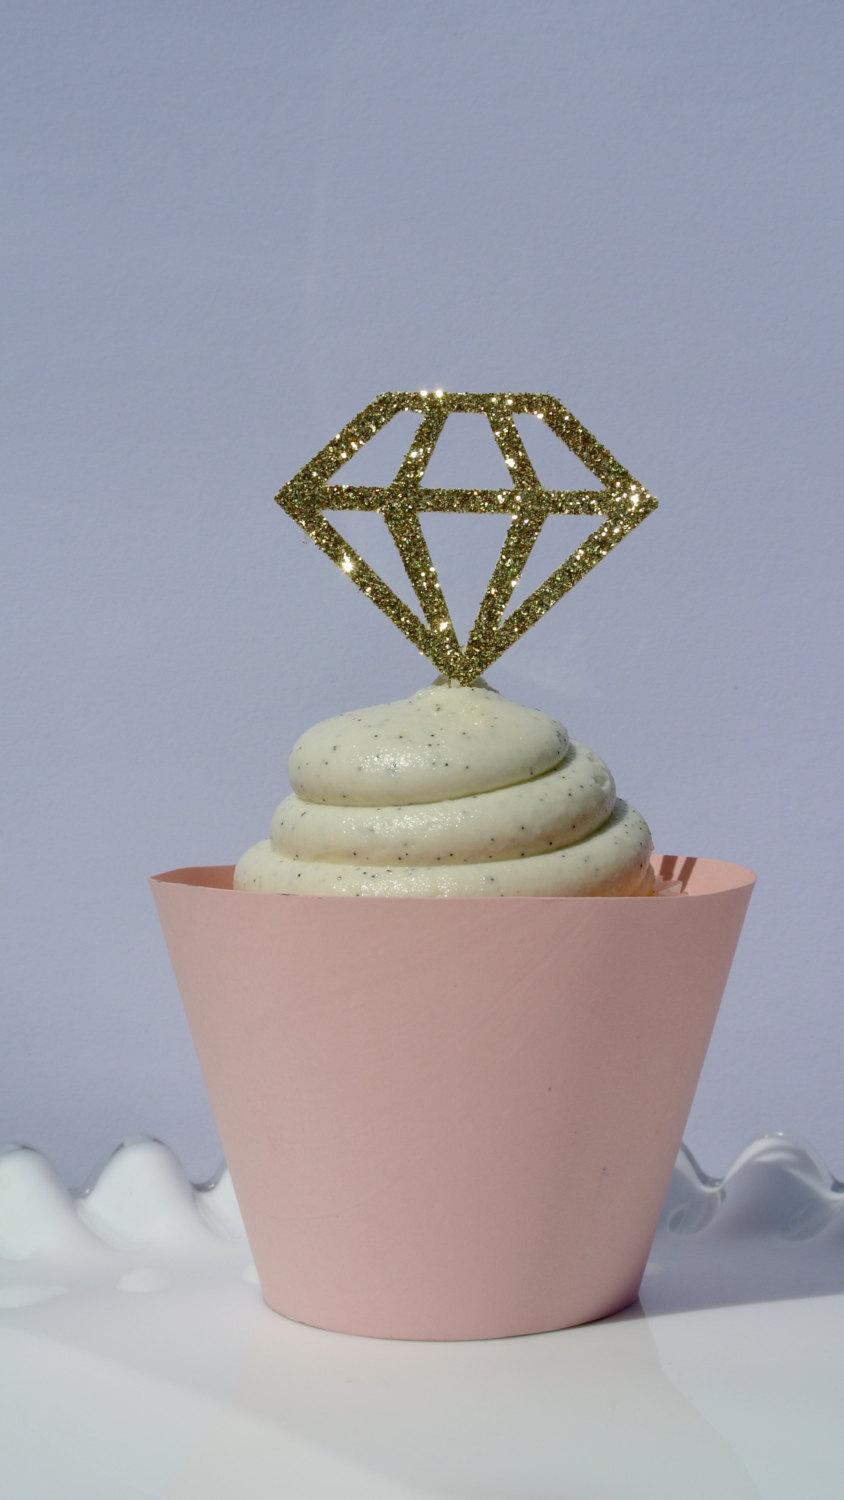 Mariage - DIAMOND CUPCAKE TOPPERS - Bachelorette Party Decorations, Bridal Shower Decorations, Wedding Cupcake Toppers